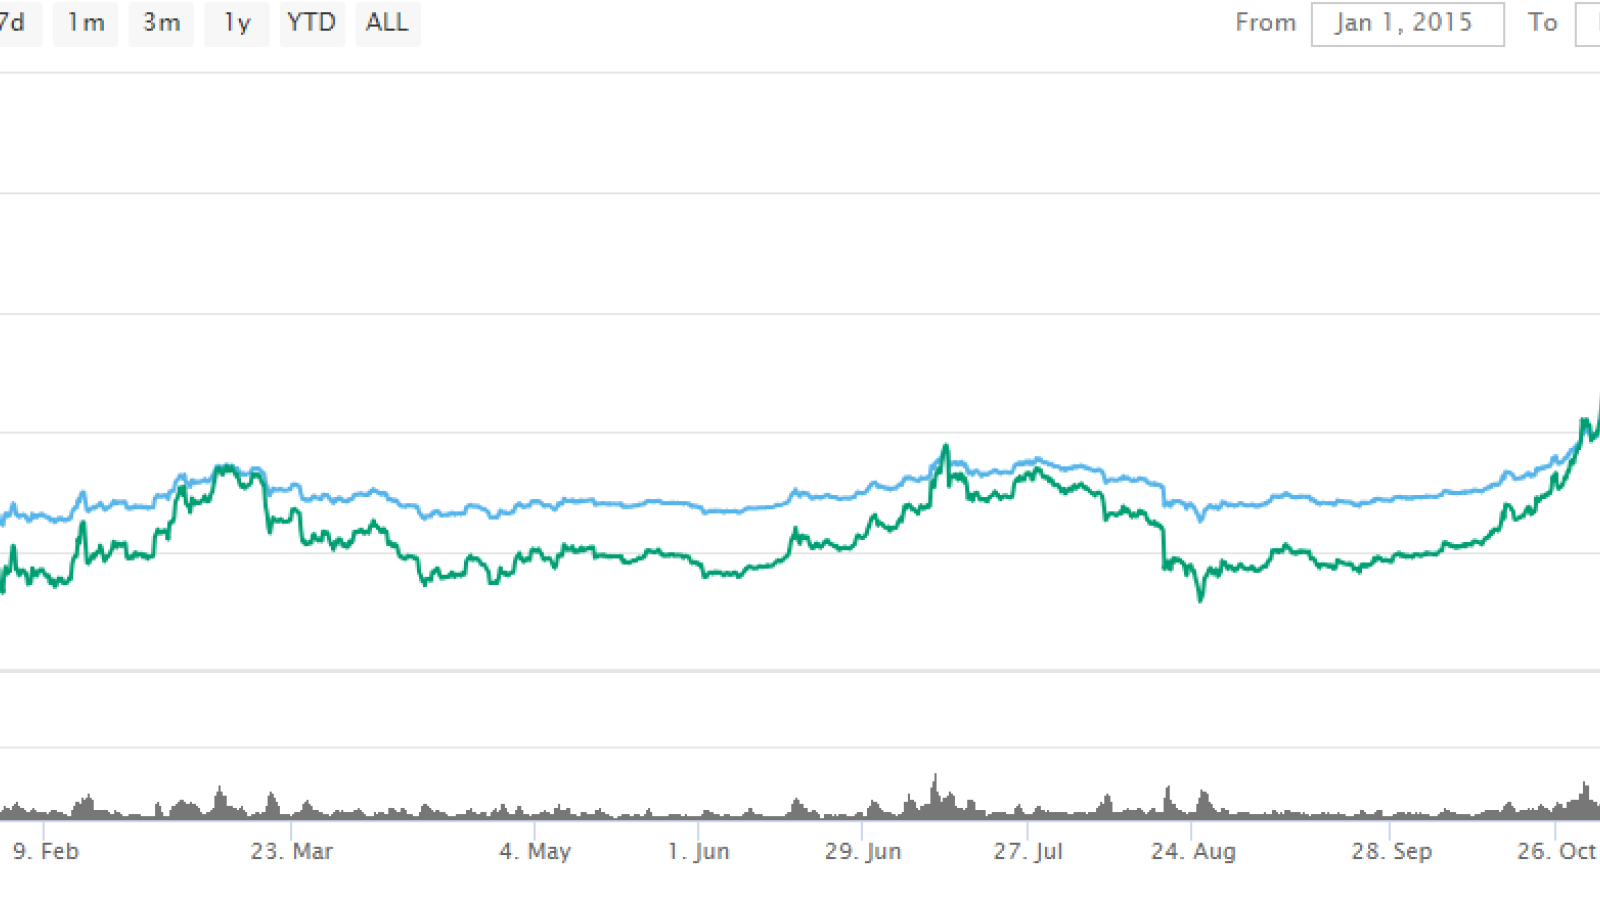 Bitcoin price fluctuations in 2015